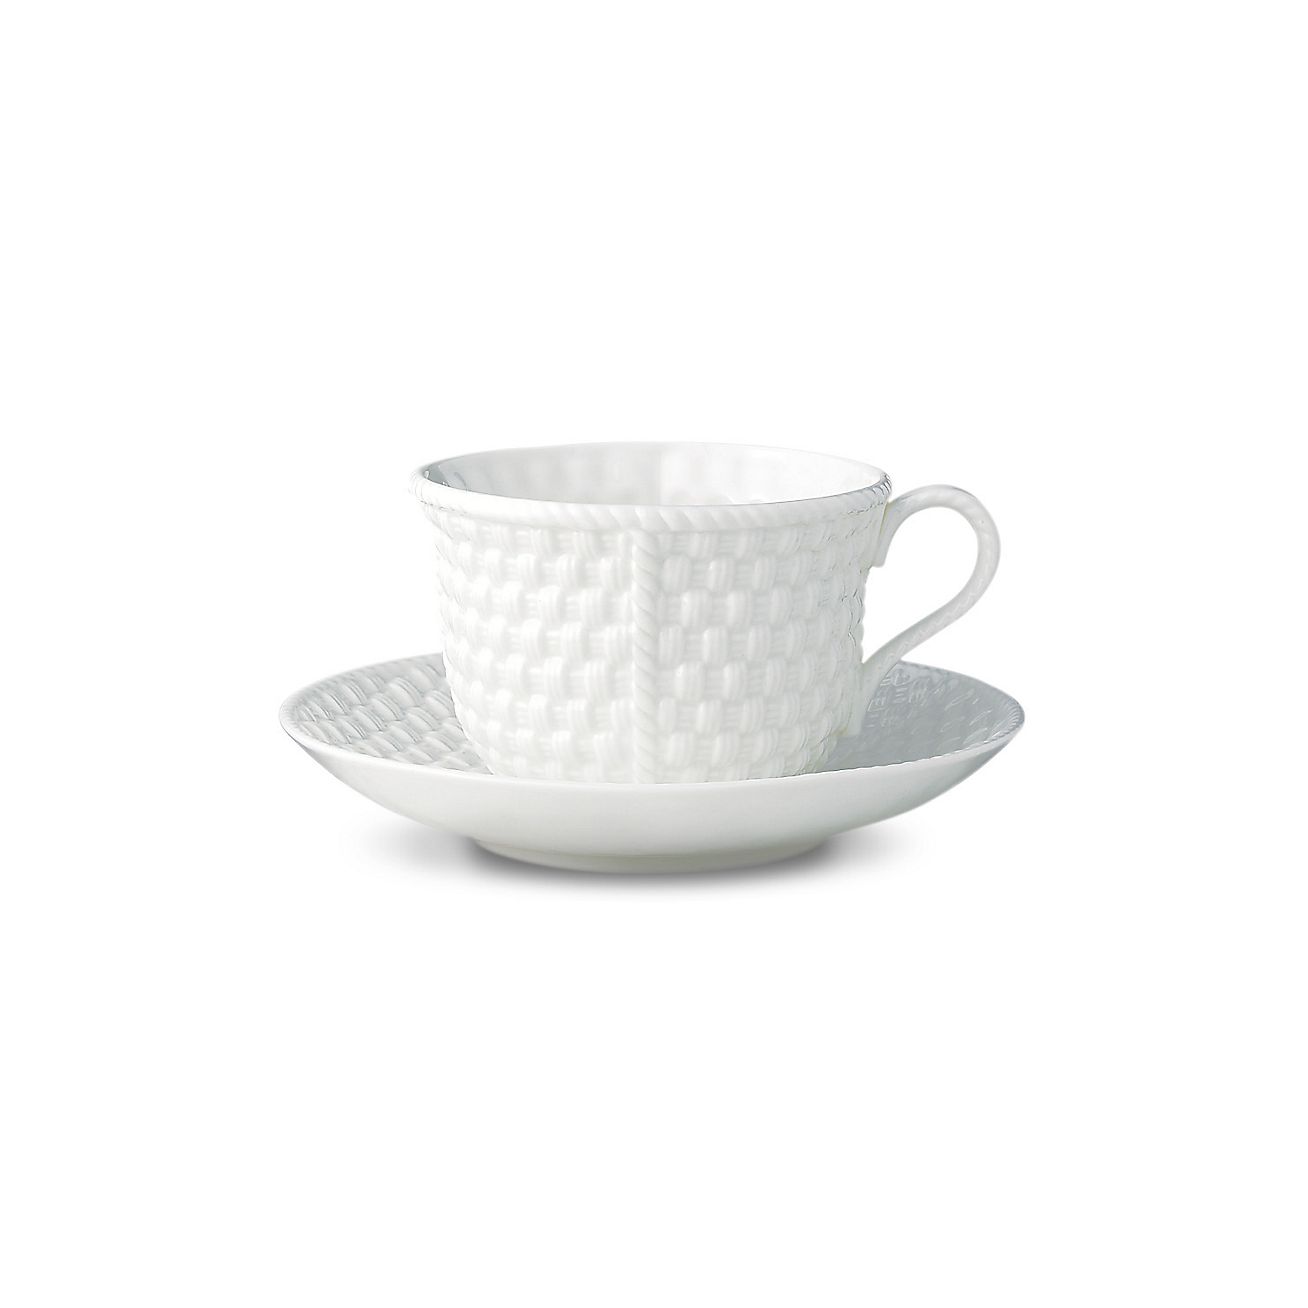 Tiffany Weave cup and saucer in fine 